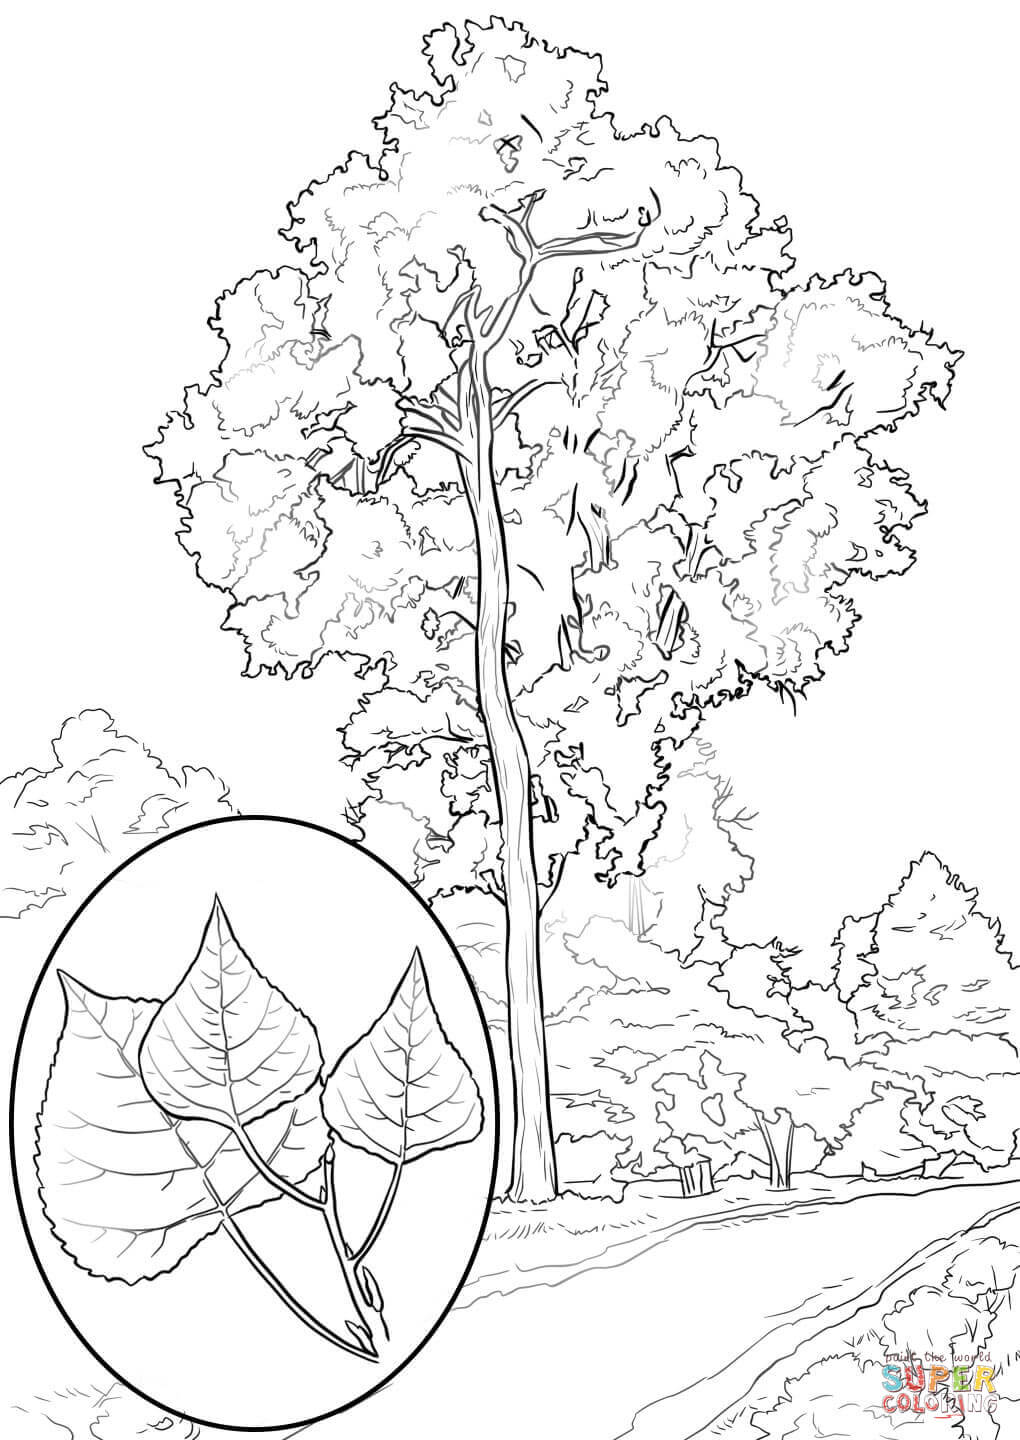 Cottonwood Trees coloring #13, Download drawings